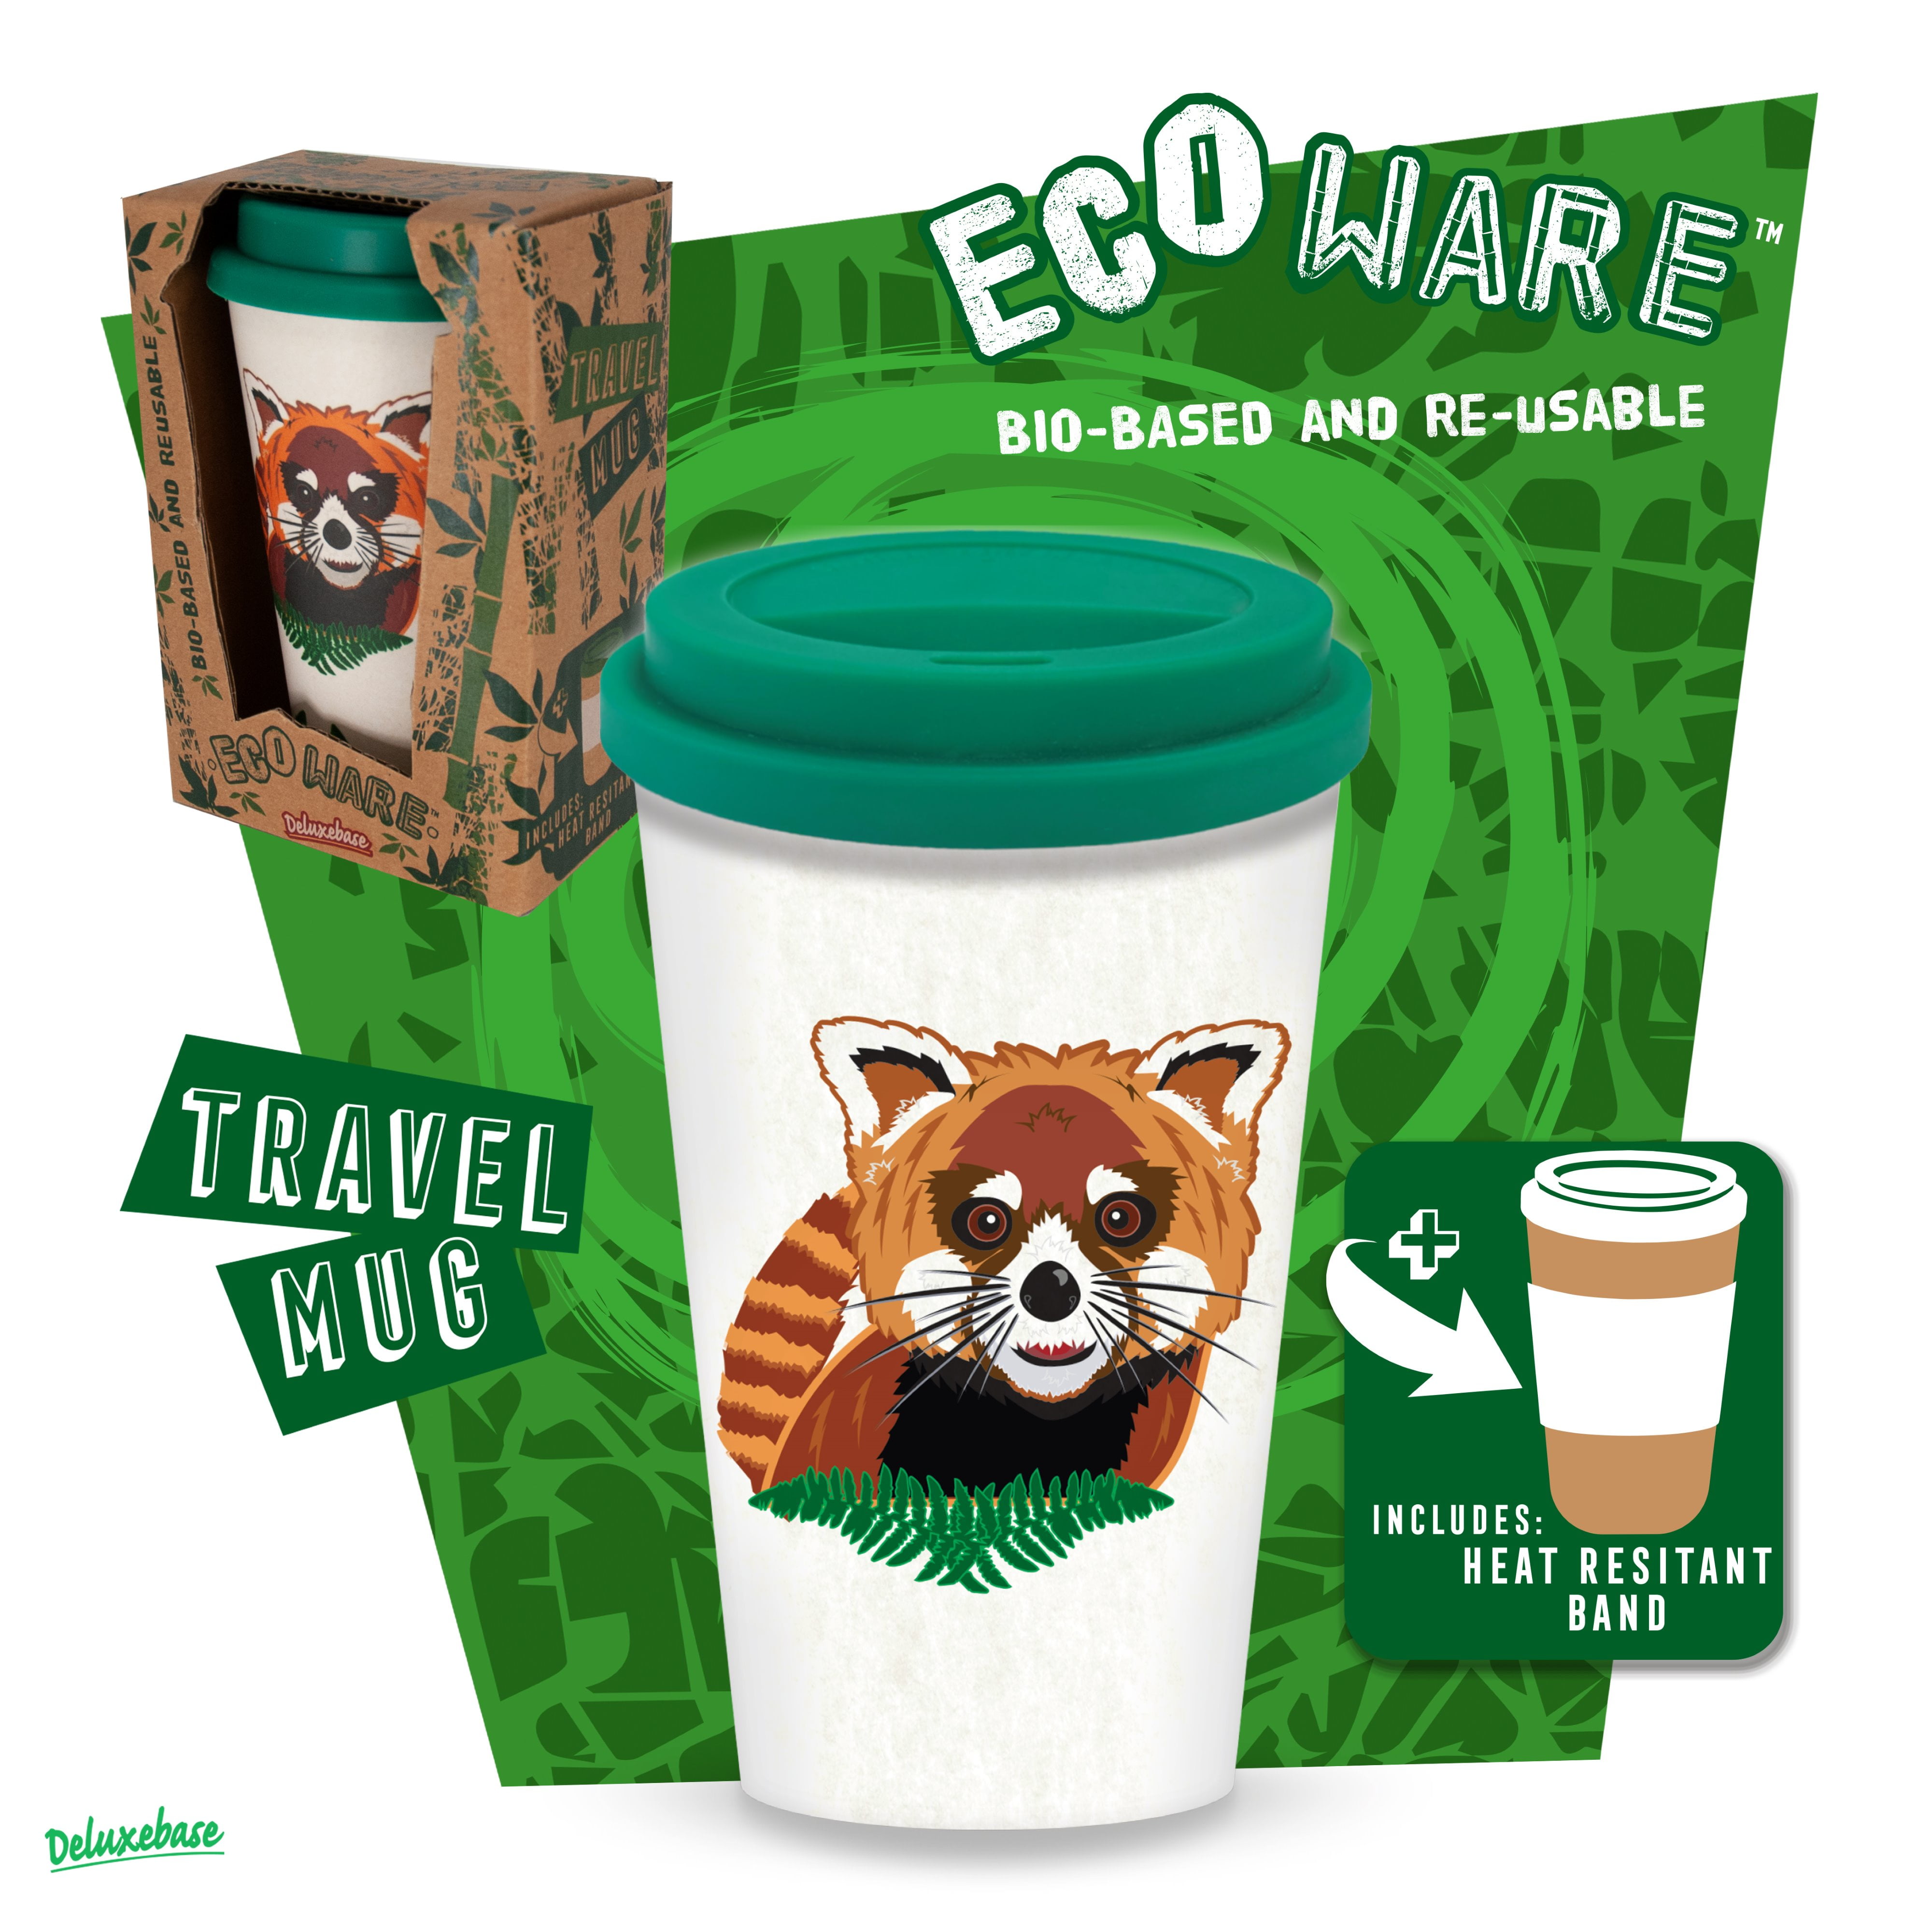 Plant-based Sustainable Deluxe Cup, Reusable Compact Coffee Mug